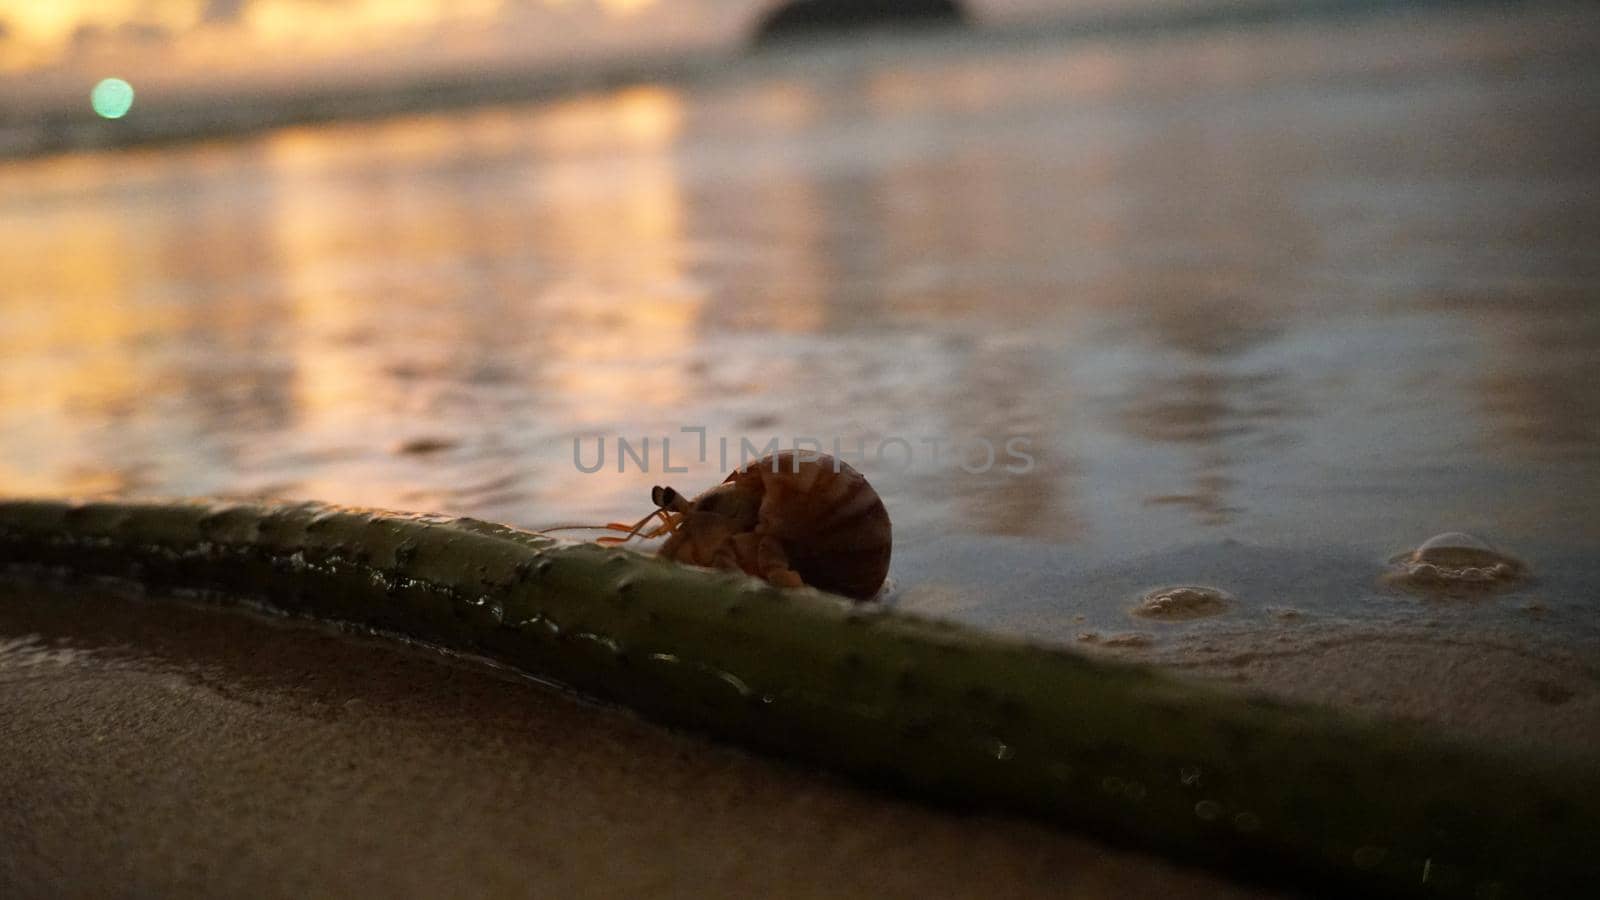 Hermit crab with cute eyes runs on the sand. by Passcal